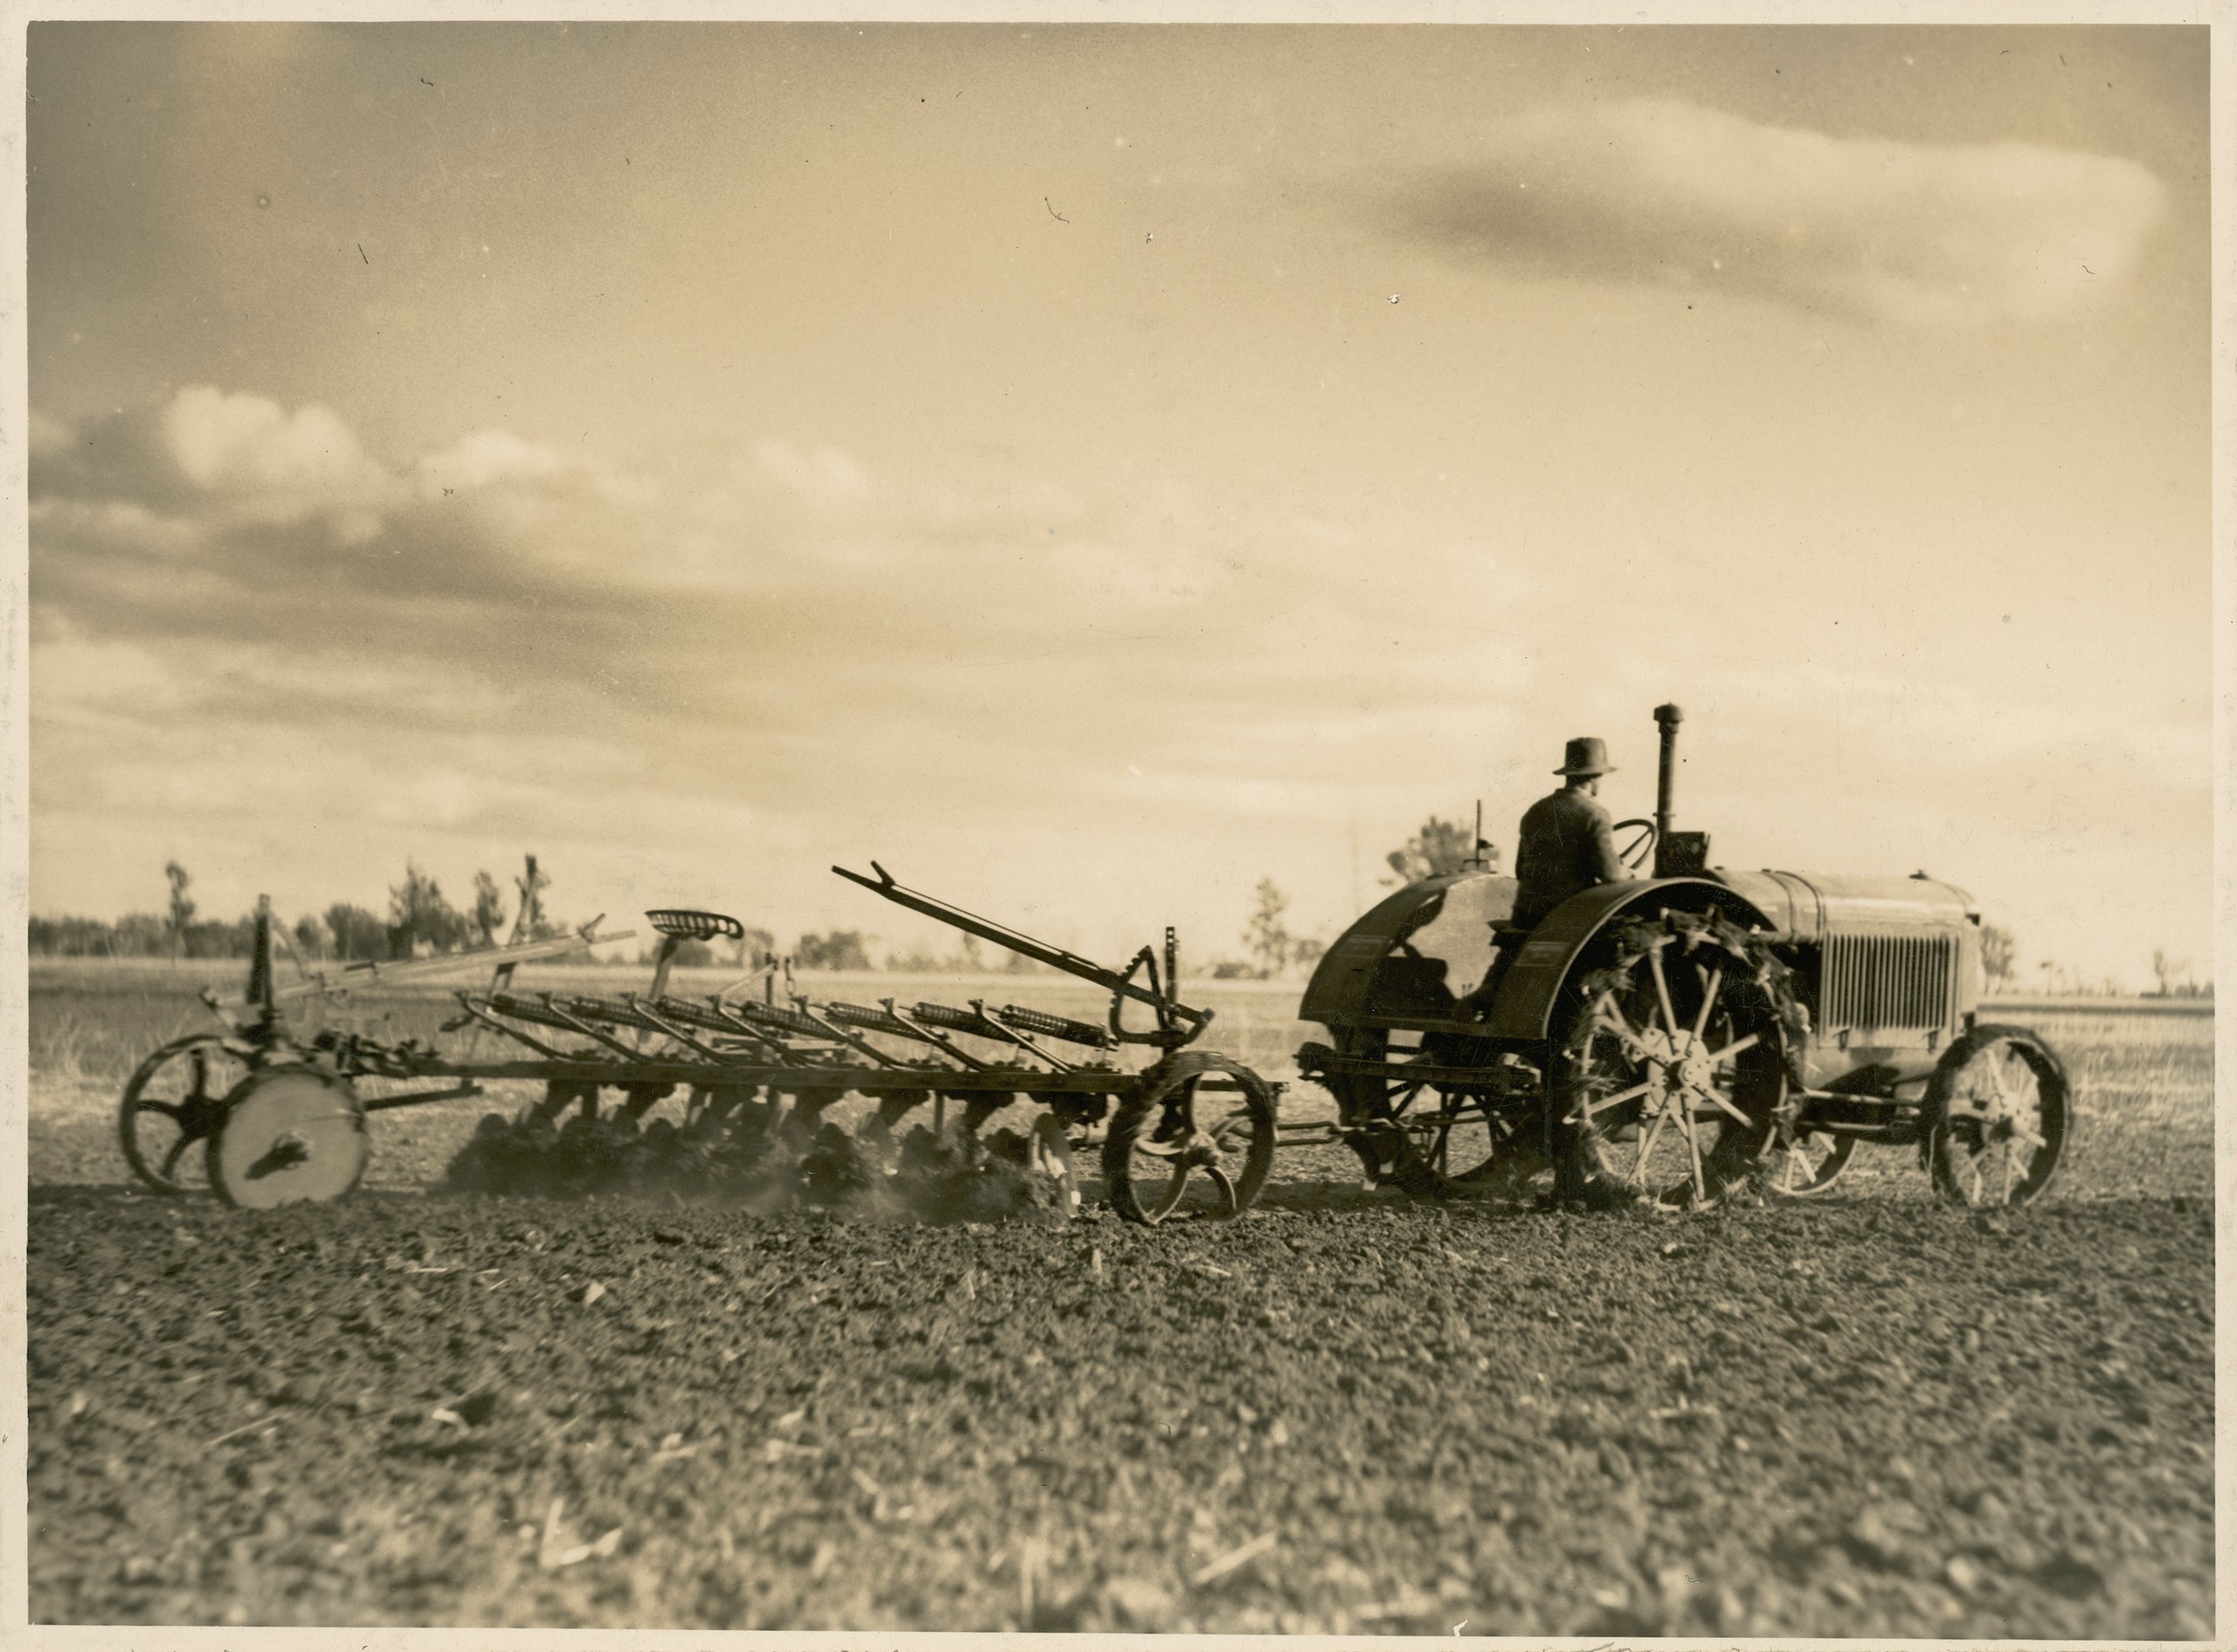 Five photographs demonstrating the preparation and planting of a field